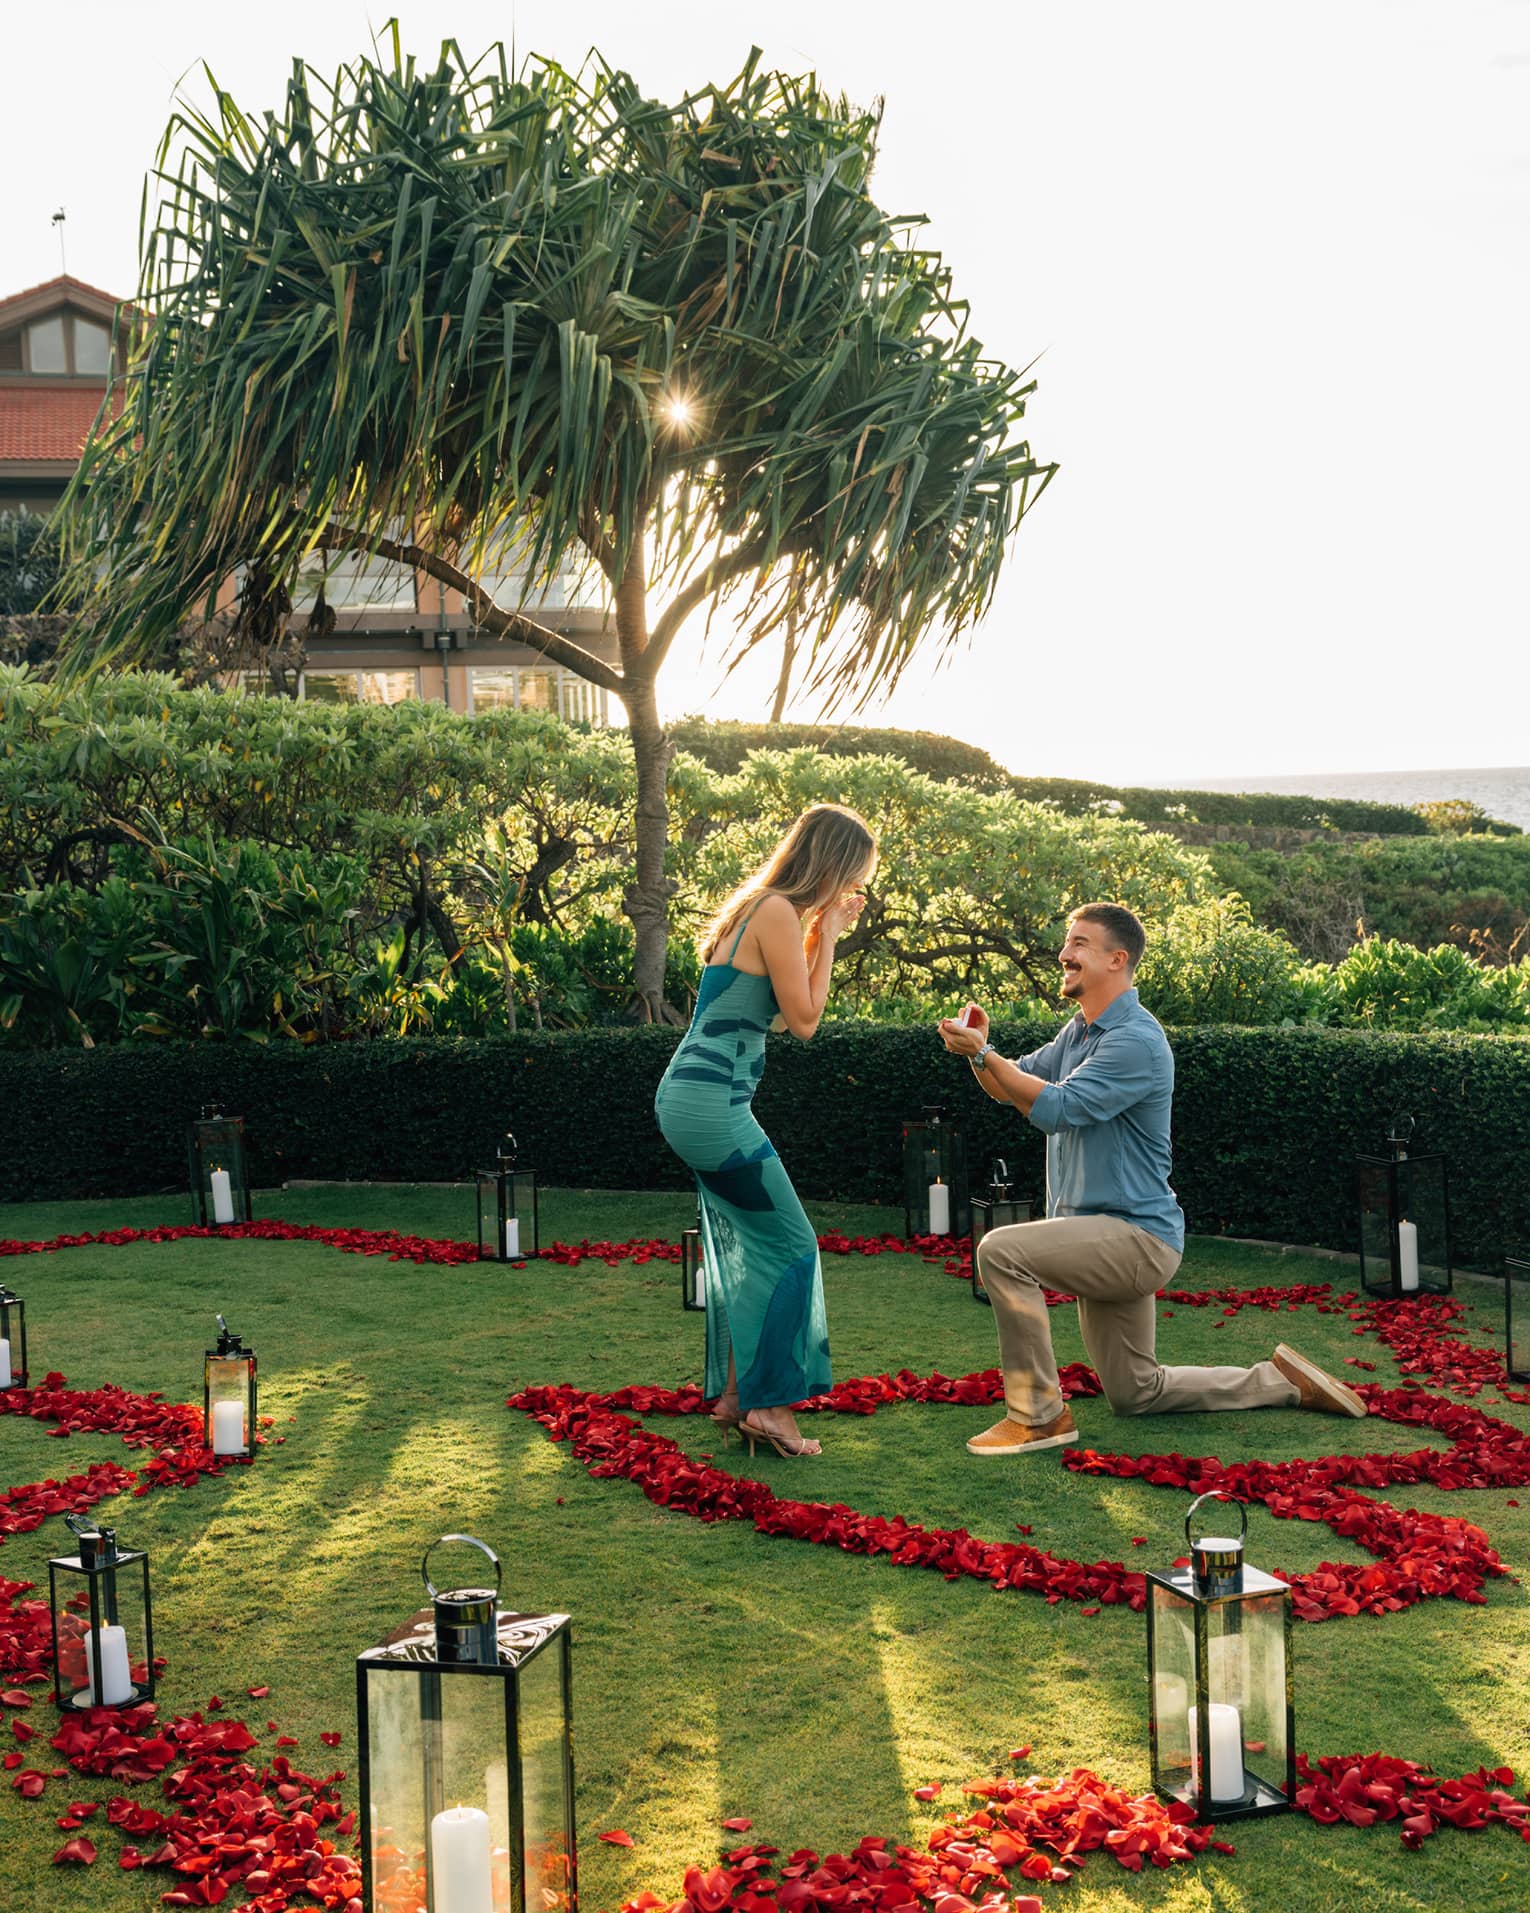 Man proposes to woman on one knee while in a tropical lawn scattered with rose petals